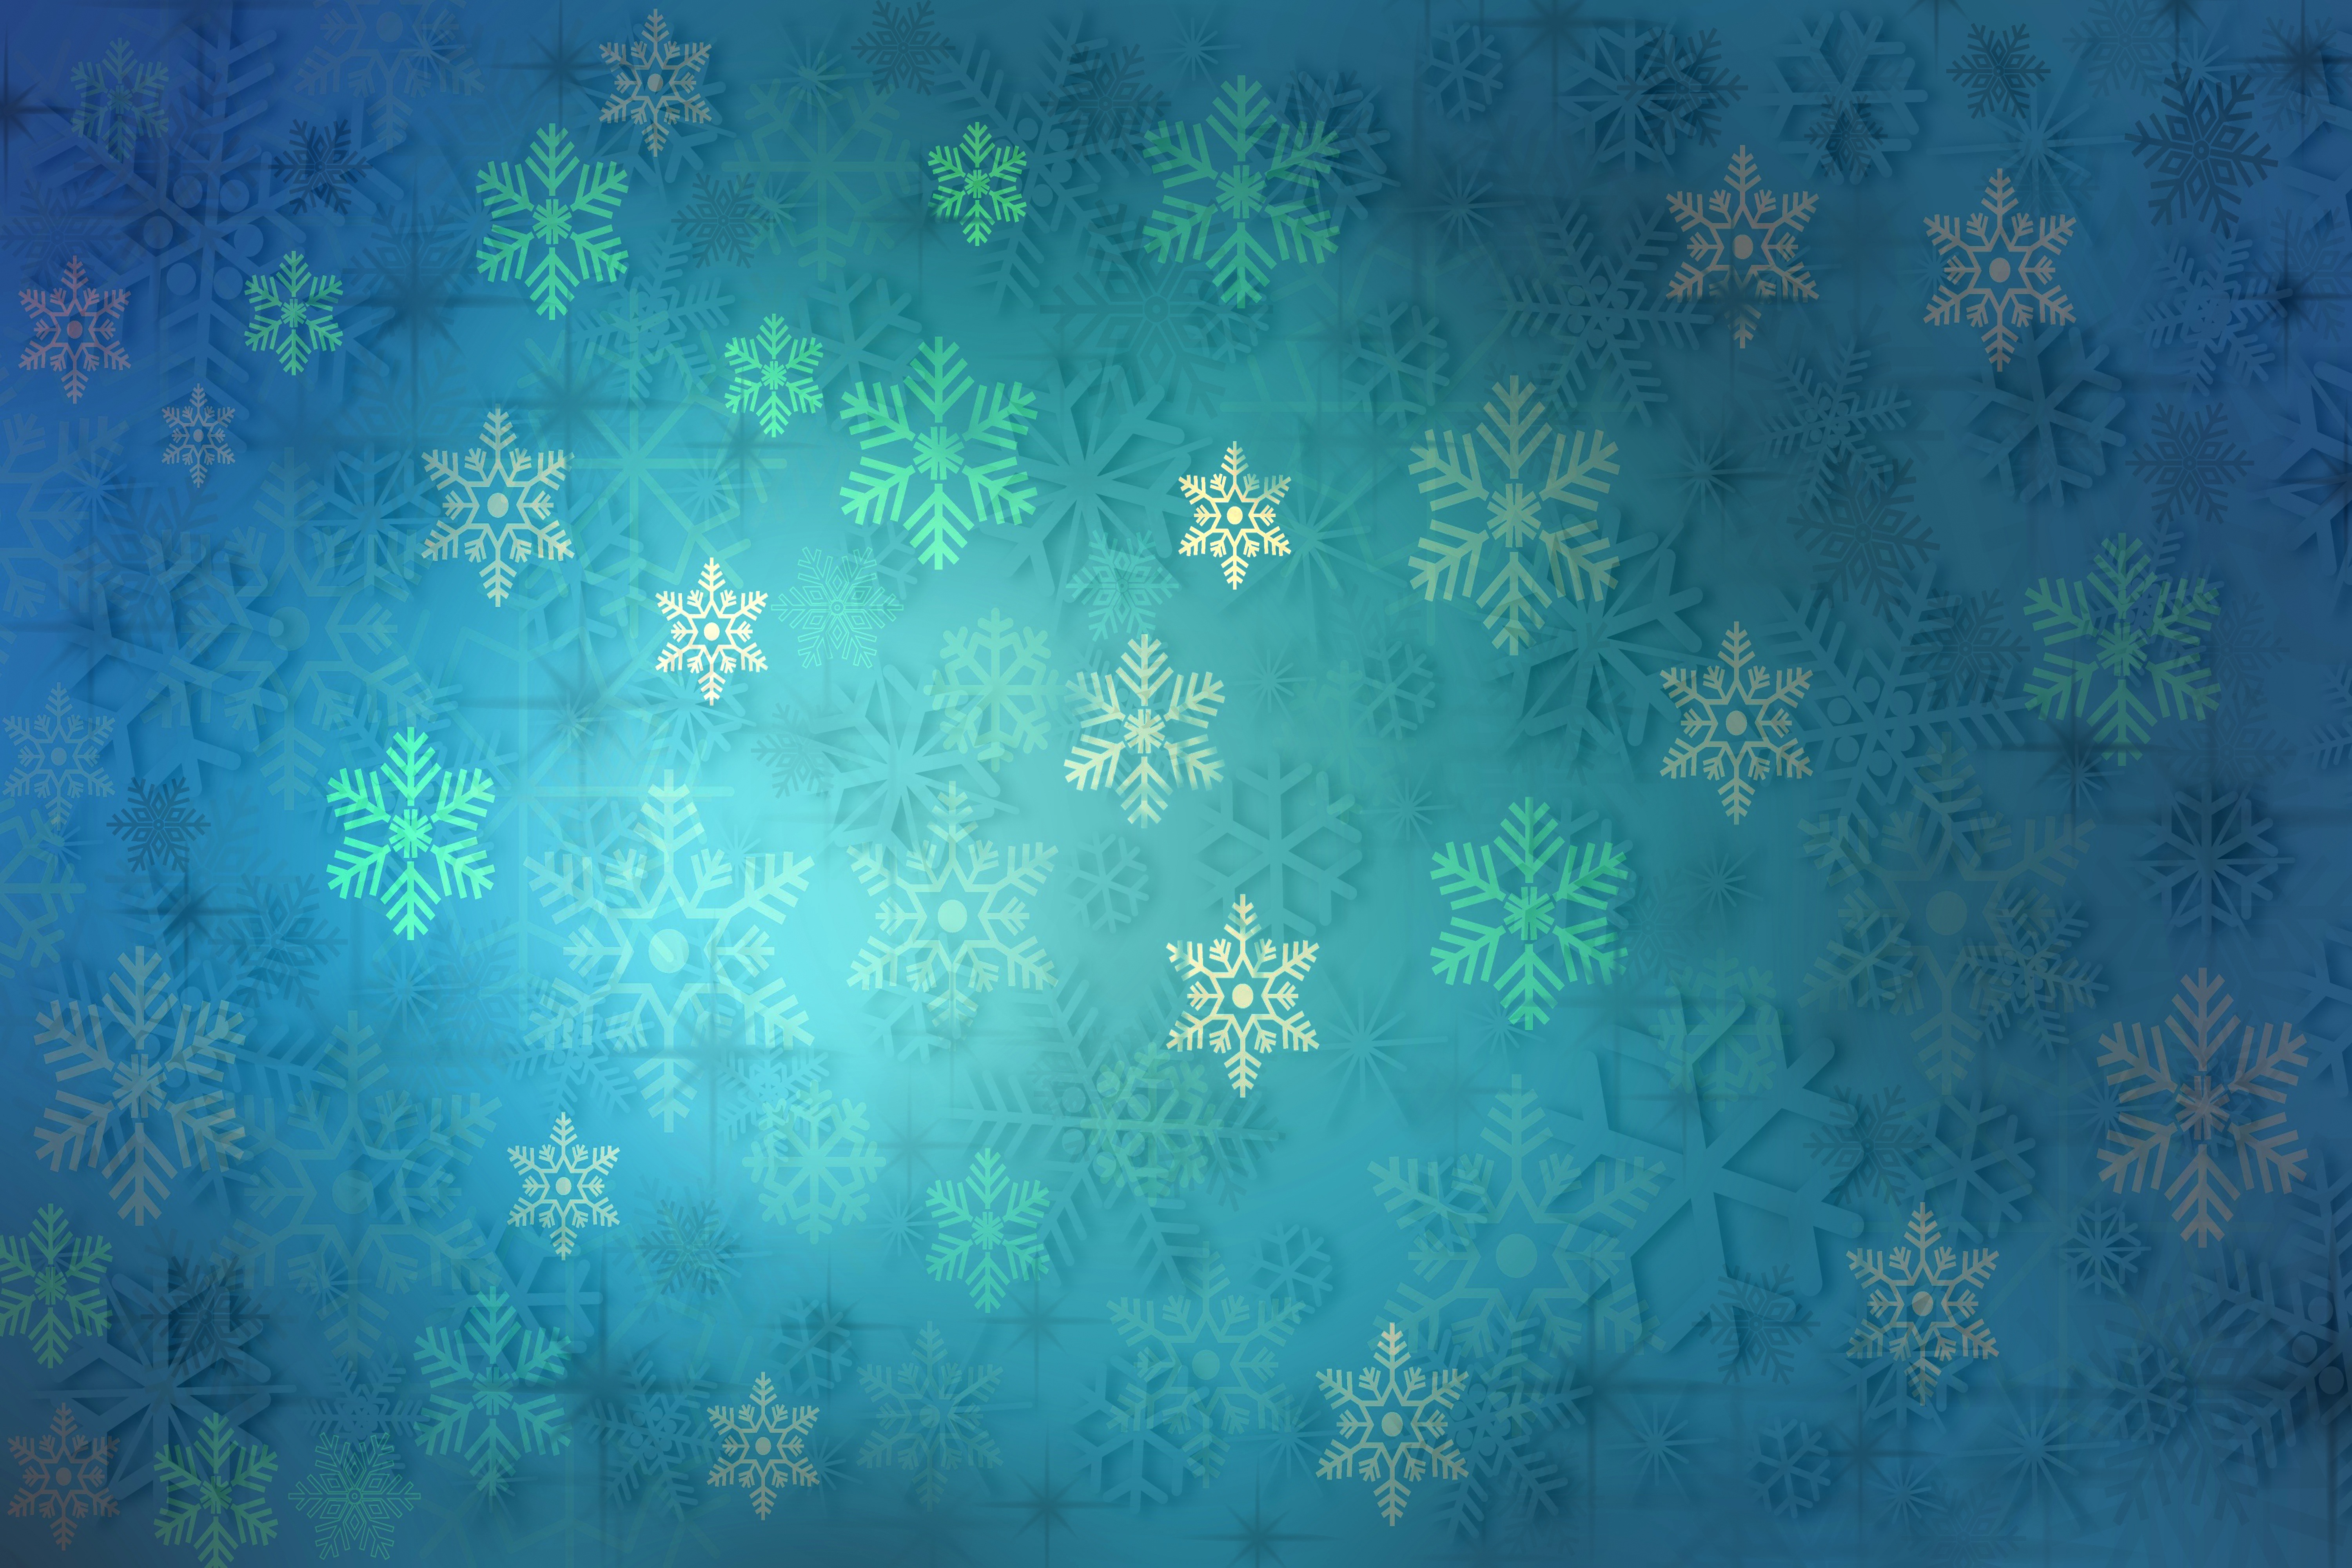 pattern, snowflakes, texture, new year, textures, christmas, blue, holiday iphone wallpaper